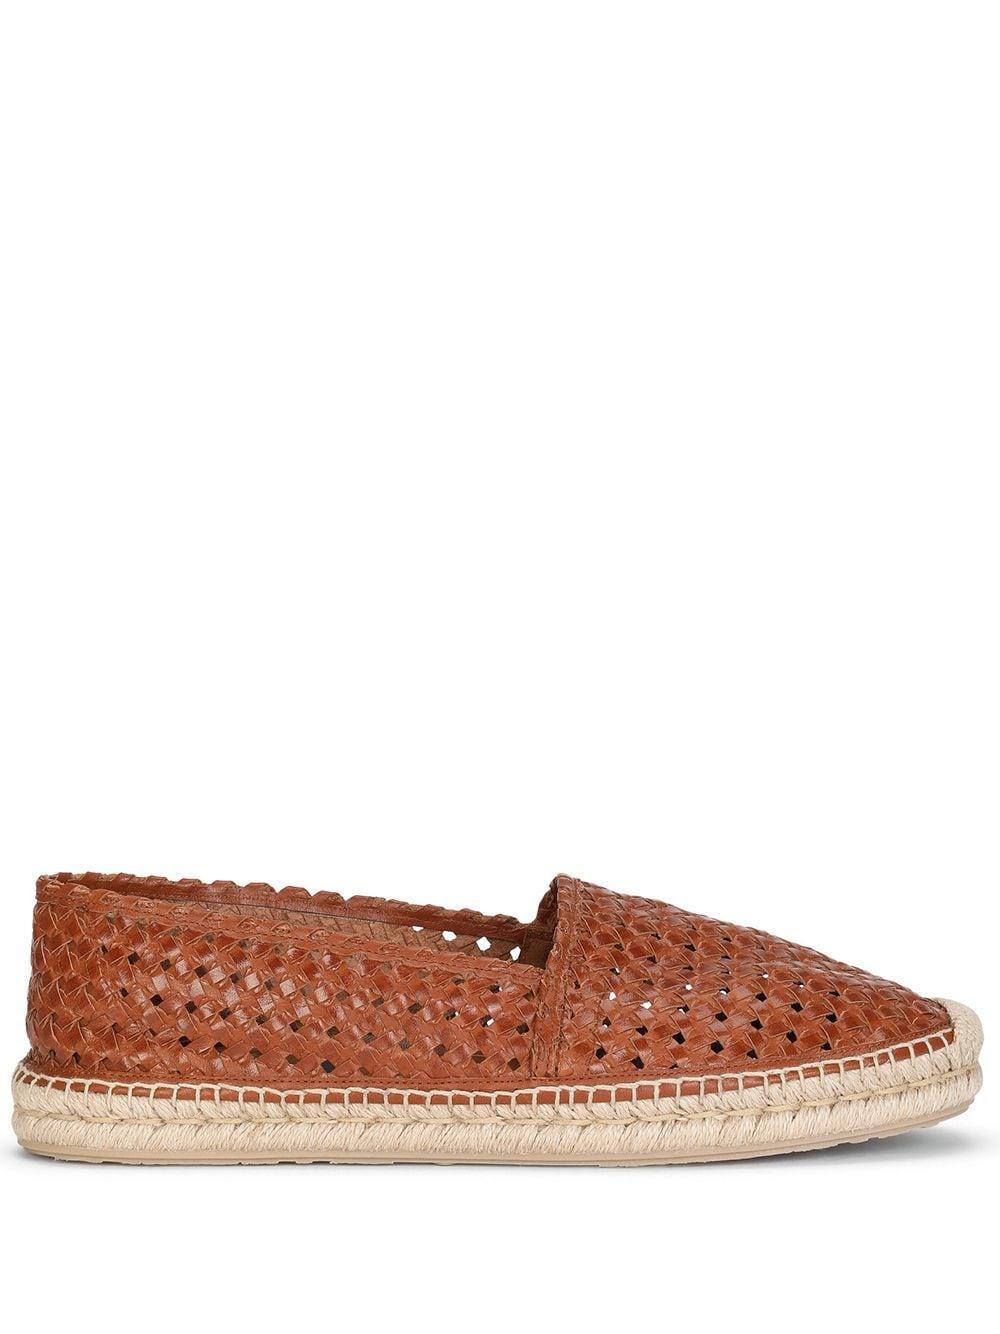 Dolce & Gabbana Woven Leather Espadrilles in Brown for Men - Lyst